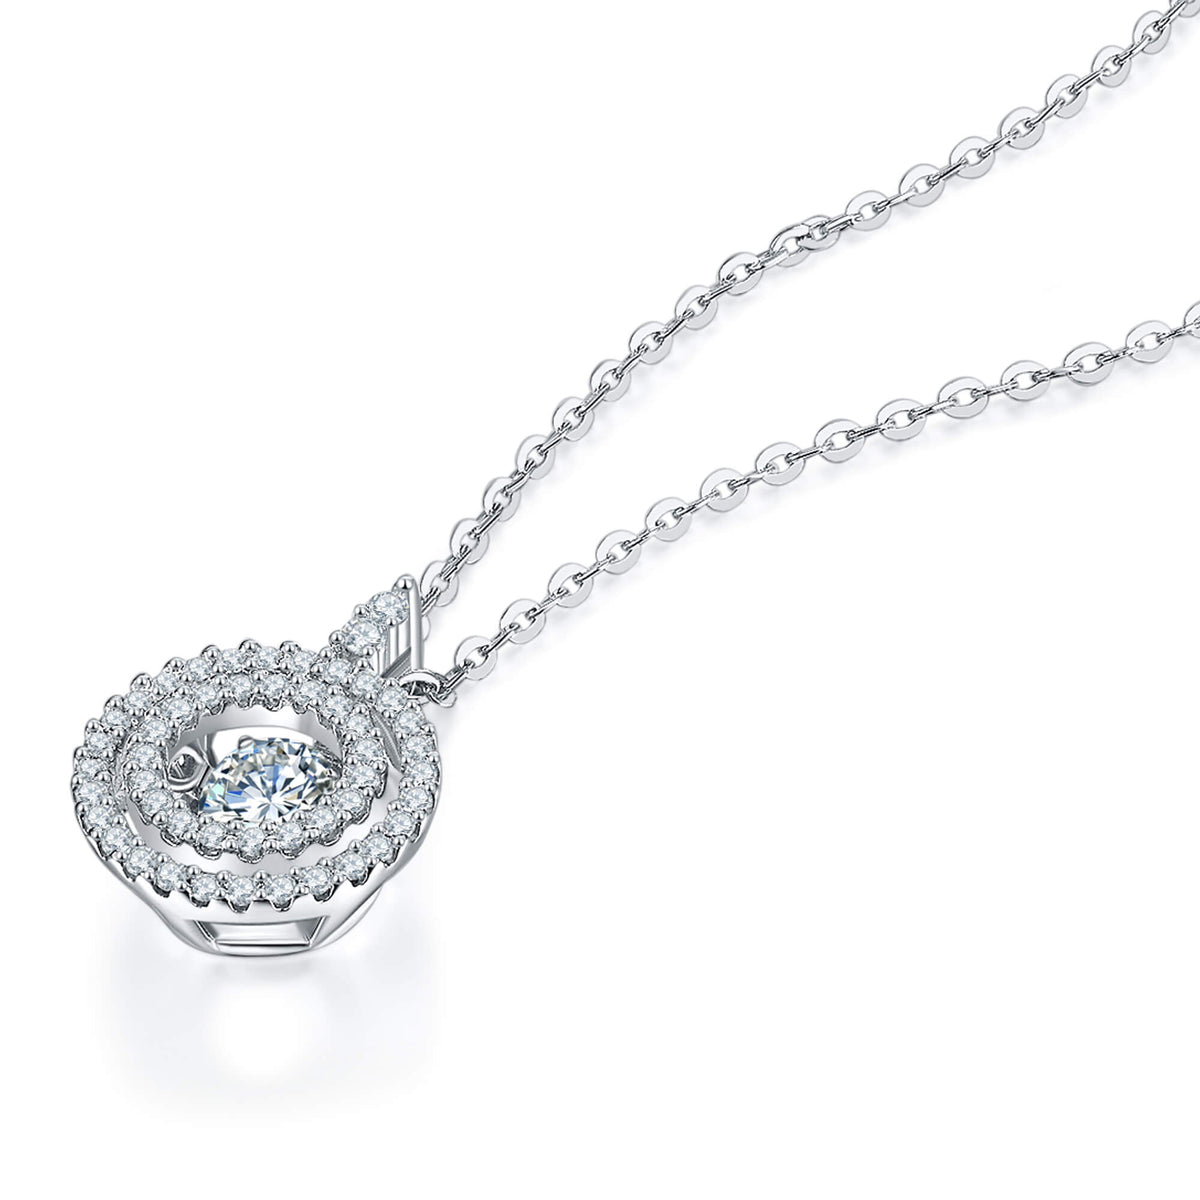 BOYA 0.66 CTW Round Moissanite Halo Pendant Necklace in 18K White Gold Plated